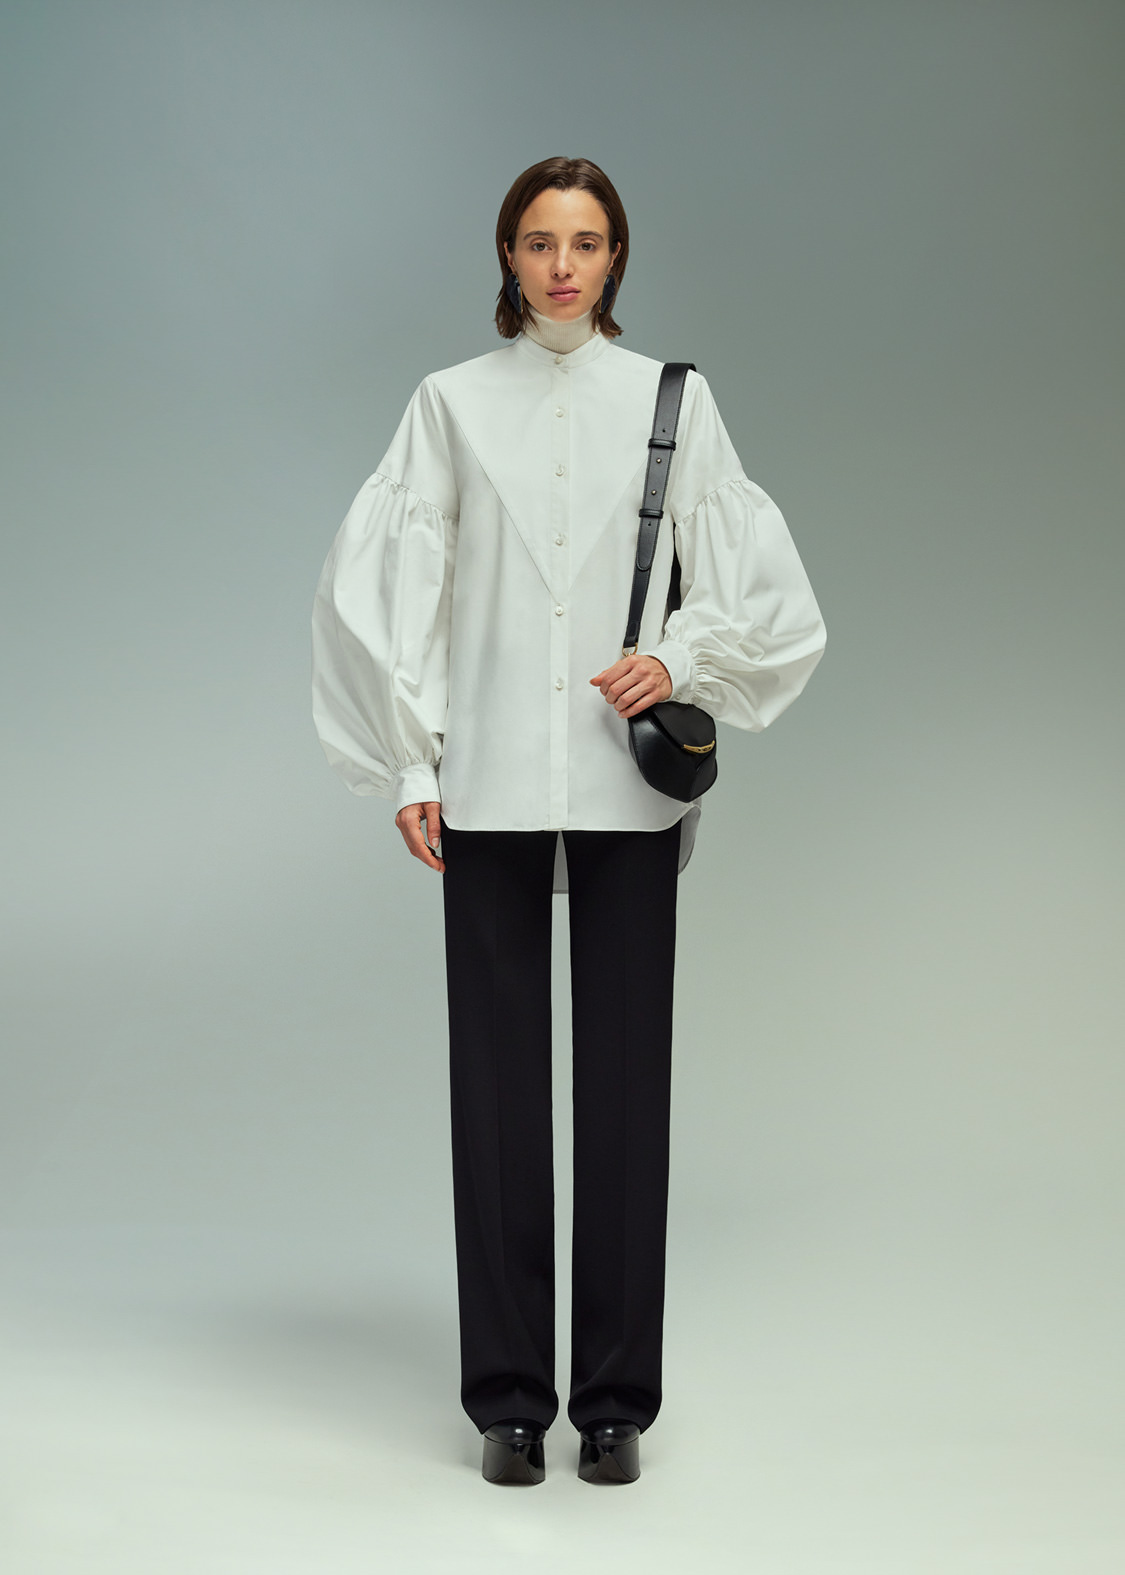 DEL CORE BALLOON SLEEVE SHIRT WITH TRIANGULAR PLASTRON IN PIQUE